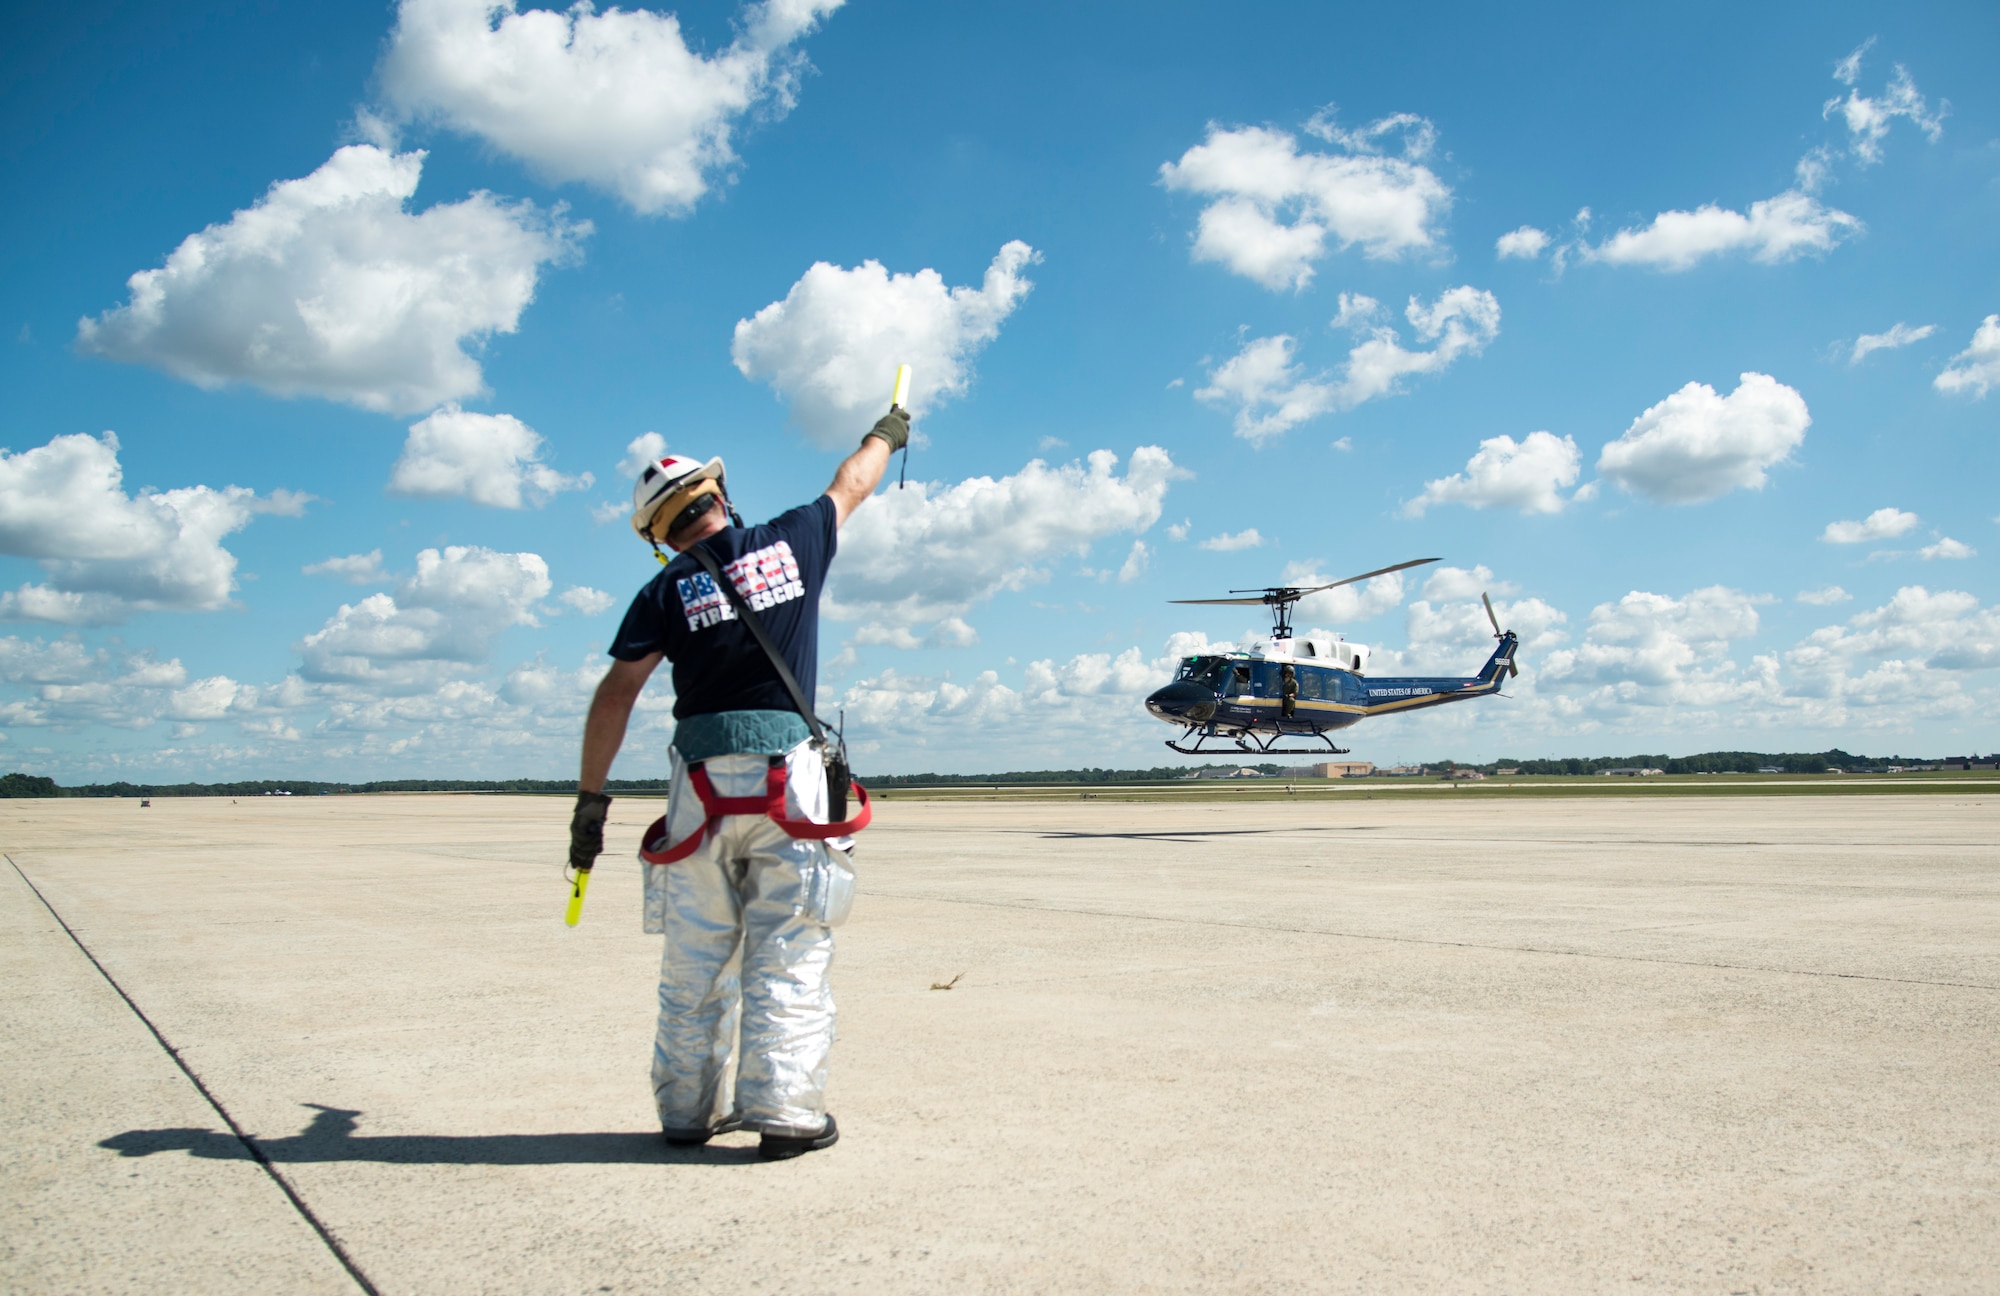 Adam Burak, 11th Wing fire department crew chief, gives the signal to take off during an emergency-readiness exercise after loading the simulated patient onto a UH-1N Huey on the flight line of Joint Base Andrews, Md., Aug. 15, 2015. The 11th Civil Engineer Squadron fire department worked alongside the 11th Security Forces Squadron, 79th Medical Wing and the 1st Helicopter Squadron during the exercise. (U.S. Air Force photo/Airman 1st Class Philip Bryant)